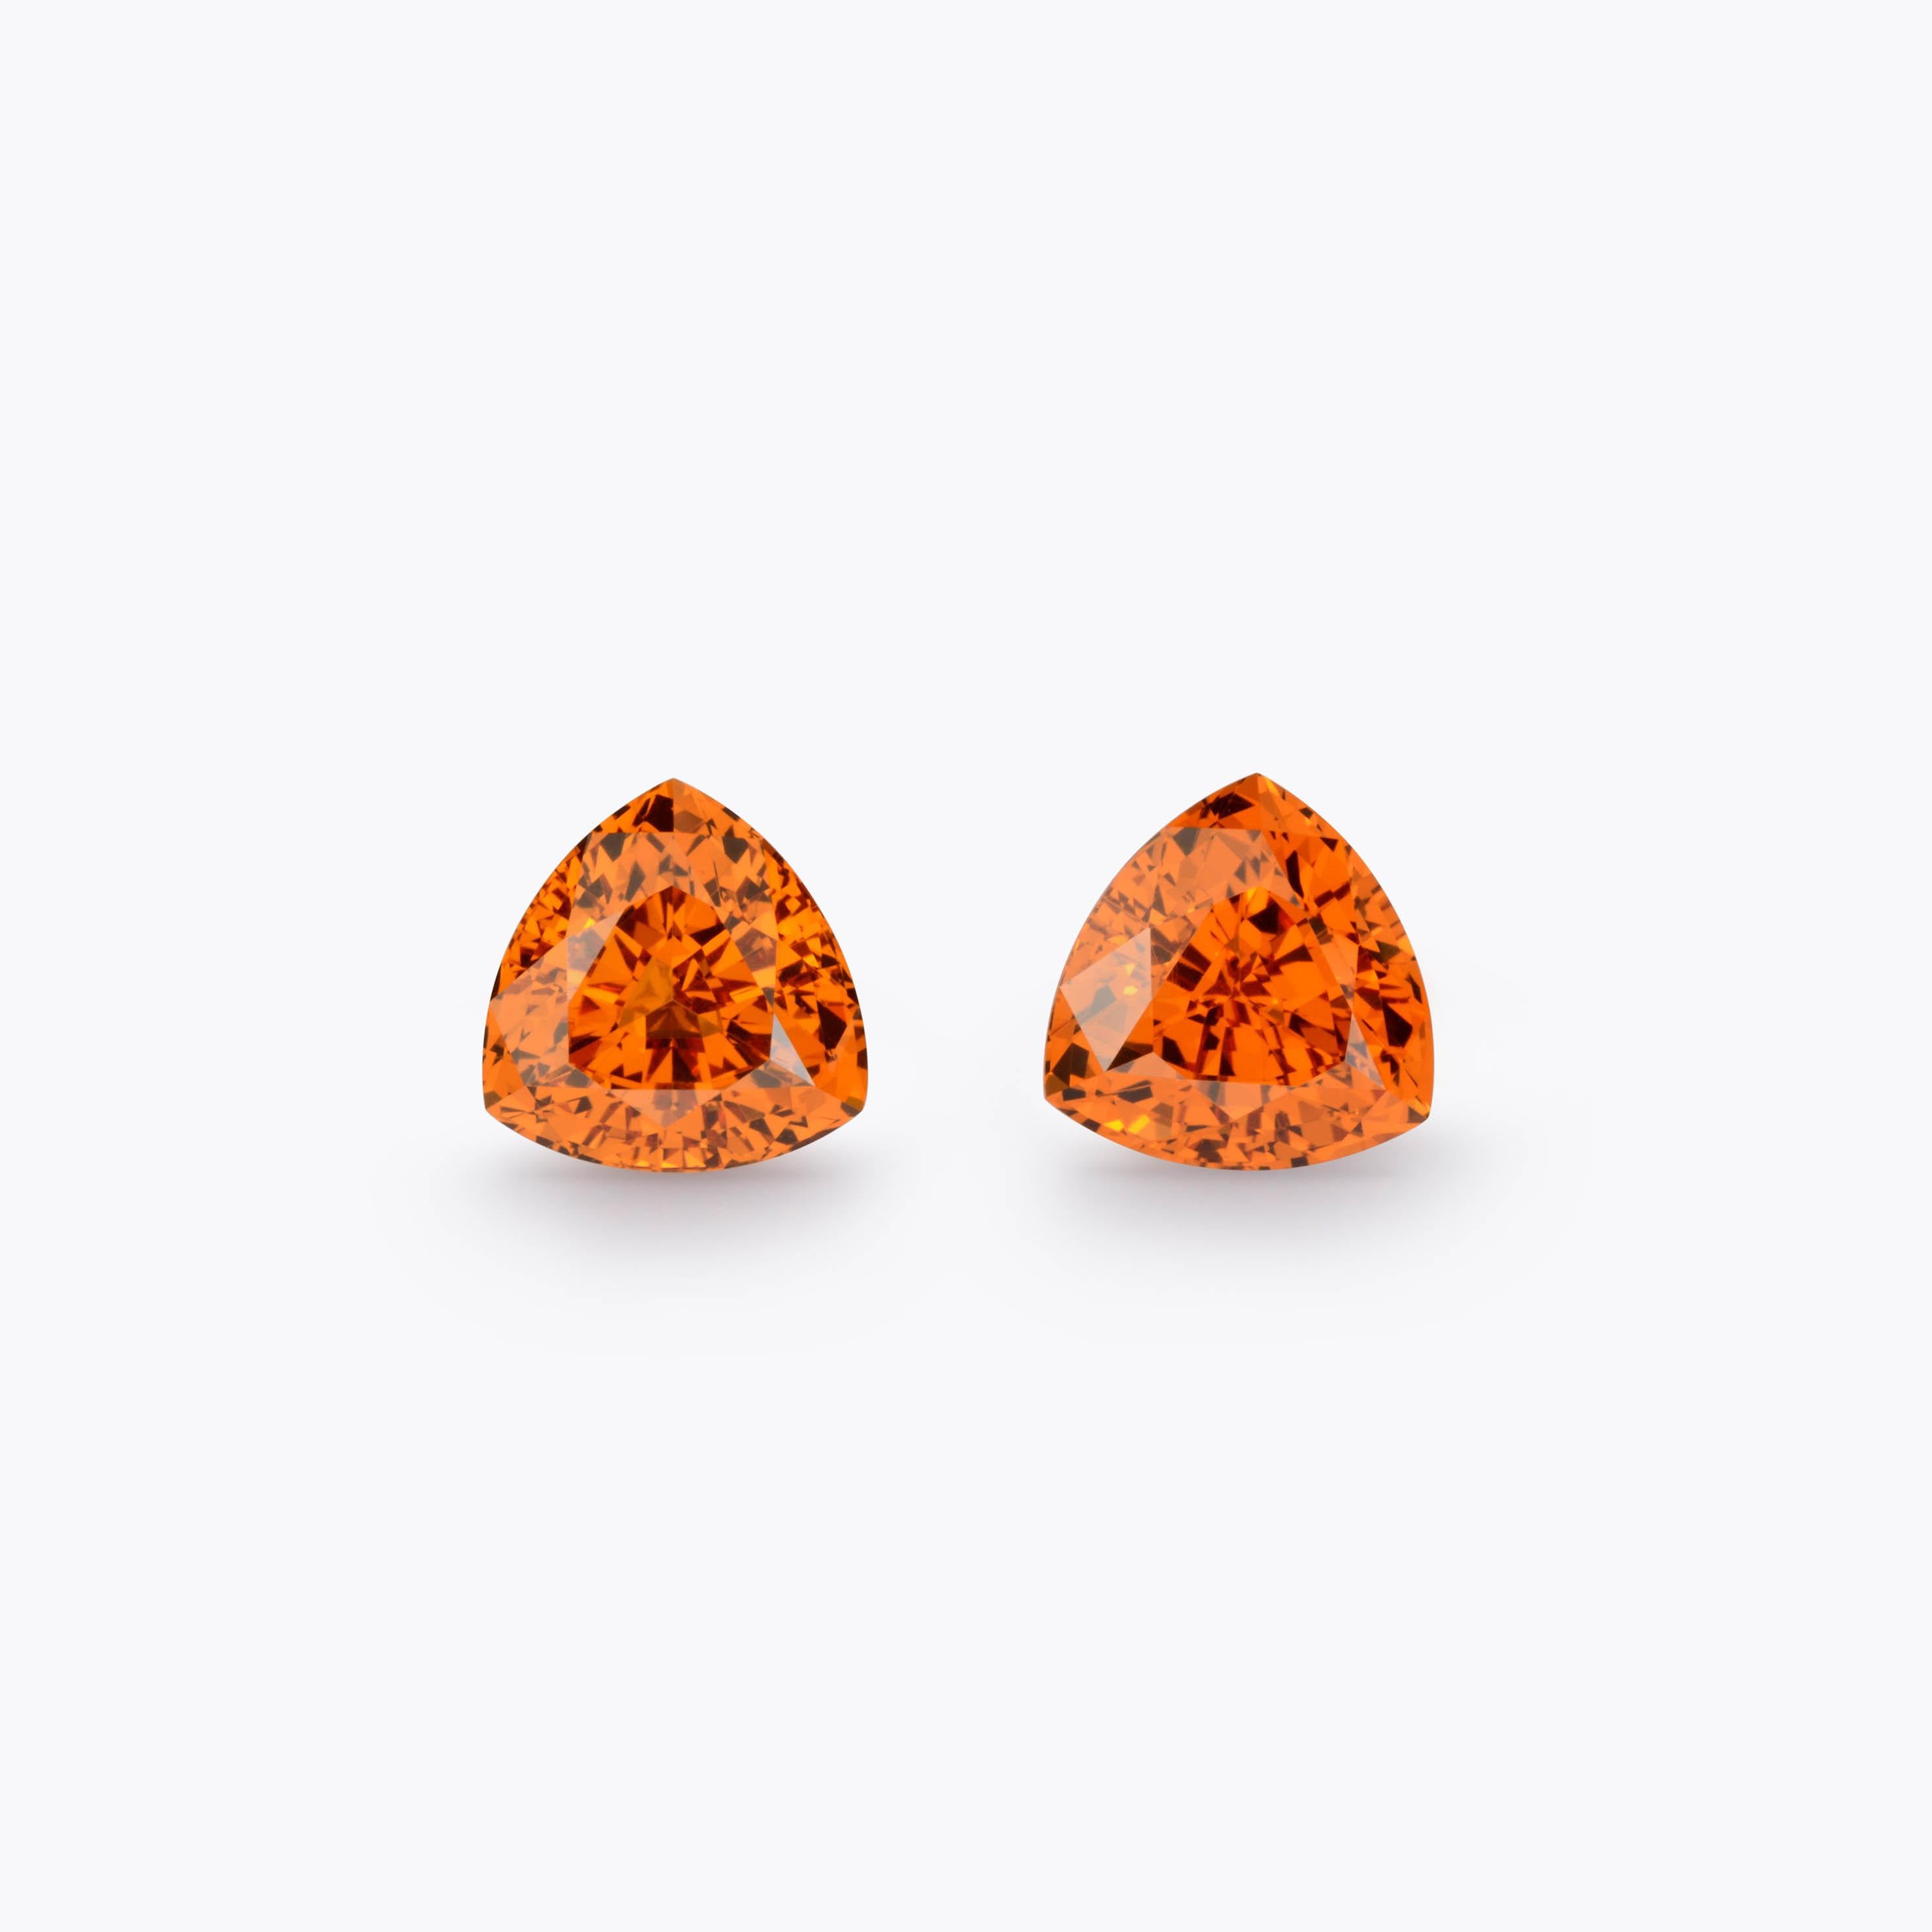 Spectacular Mandarin Garnet Trillion pair totaling 3.39 carats, offered unmounted for a unique custom pair of earrings.
Dimensions: 7 x 7 x 4.4 mm.
Returns are accepted and paid by us within 7 days of delivery.
We offer supreme custom jewelry work